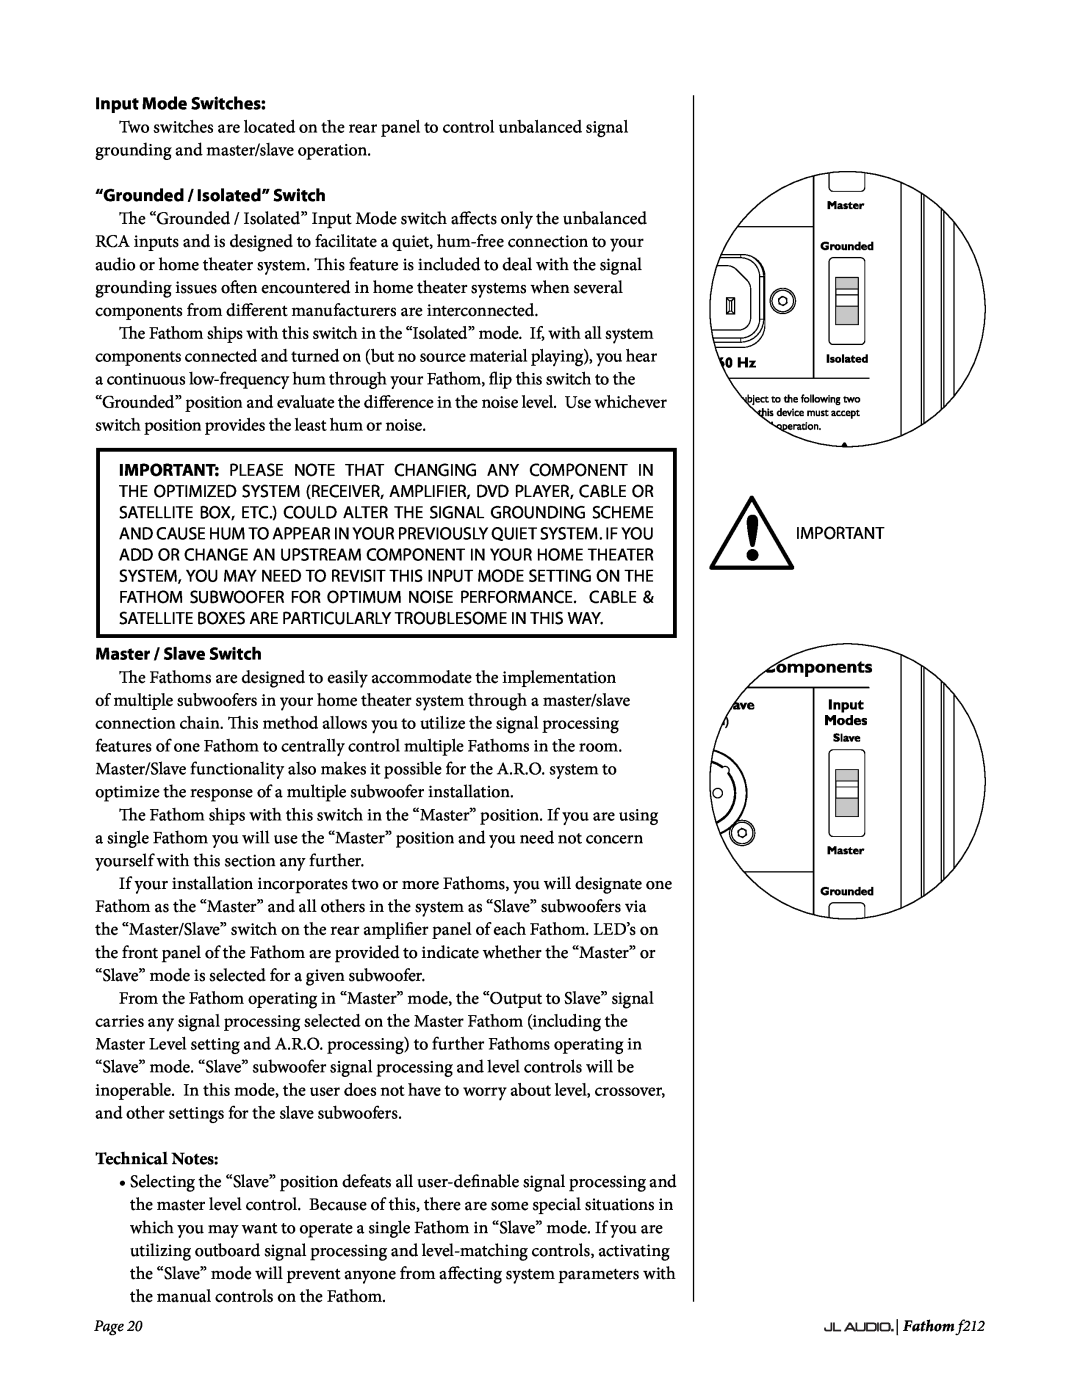 JL Audio f212 owner manual Input Mode Switches, “Grounded / Isolated” Switch, Master / Slave Switch, Technical Notes 